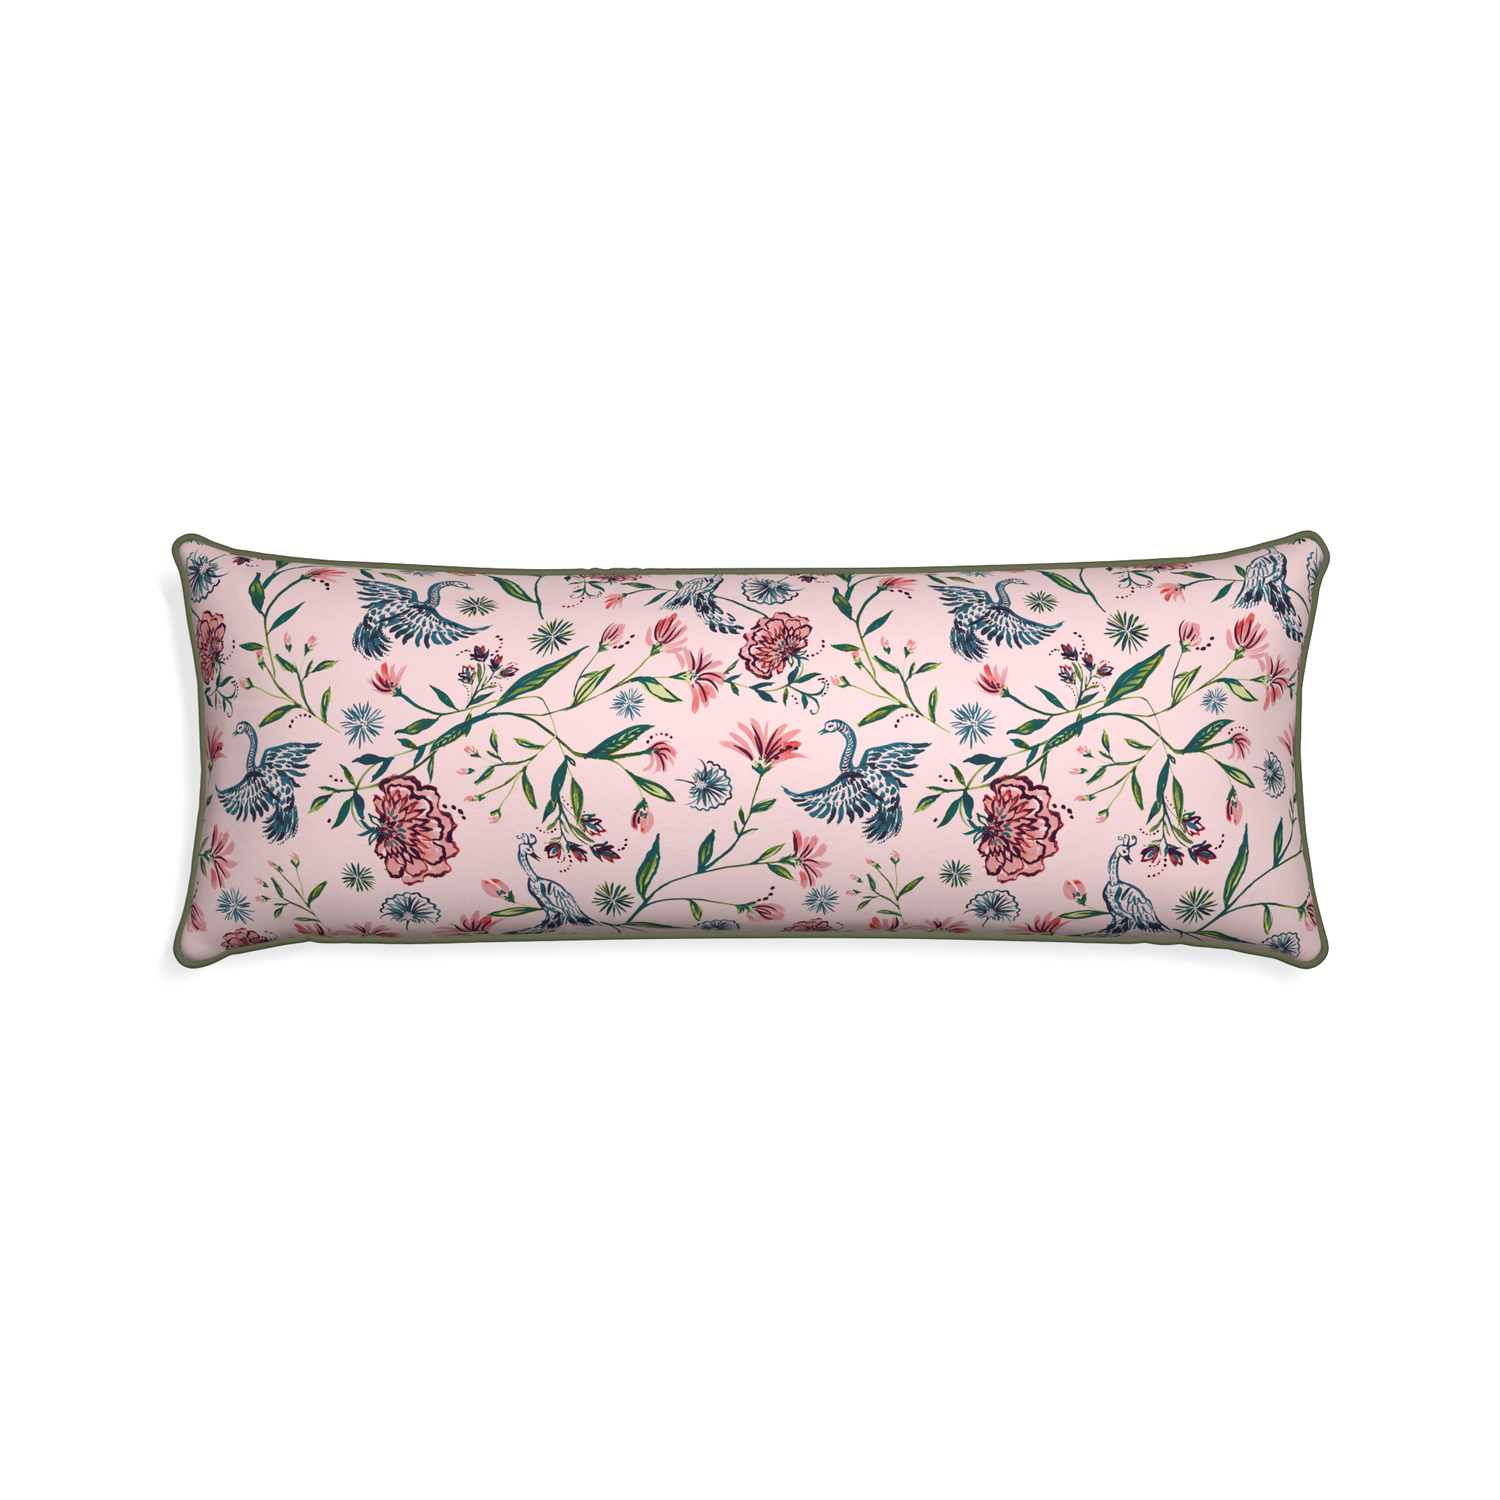 Xl-lumbar daphne rose custom pillow with f piping on white background